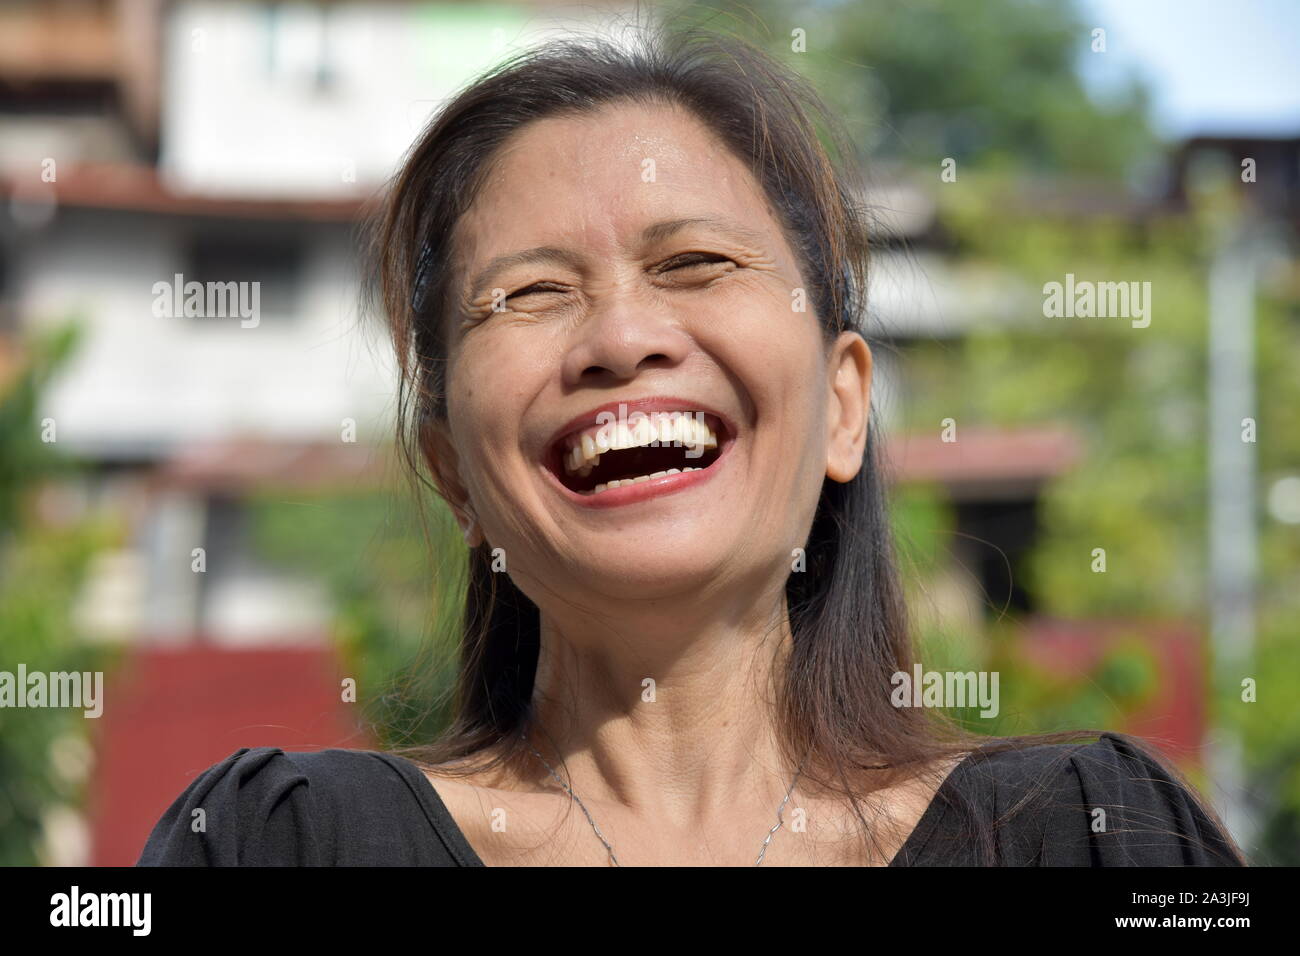 A Senior Adult Female And Laughter Stock Photo